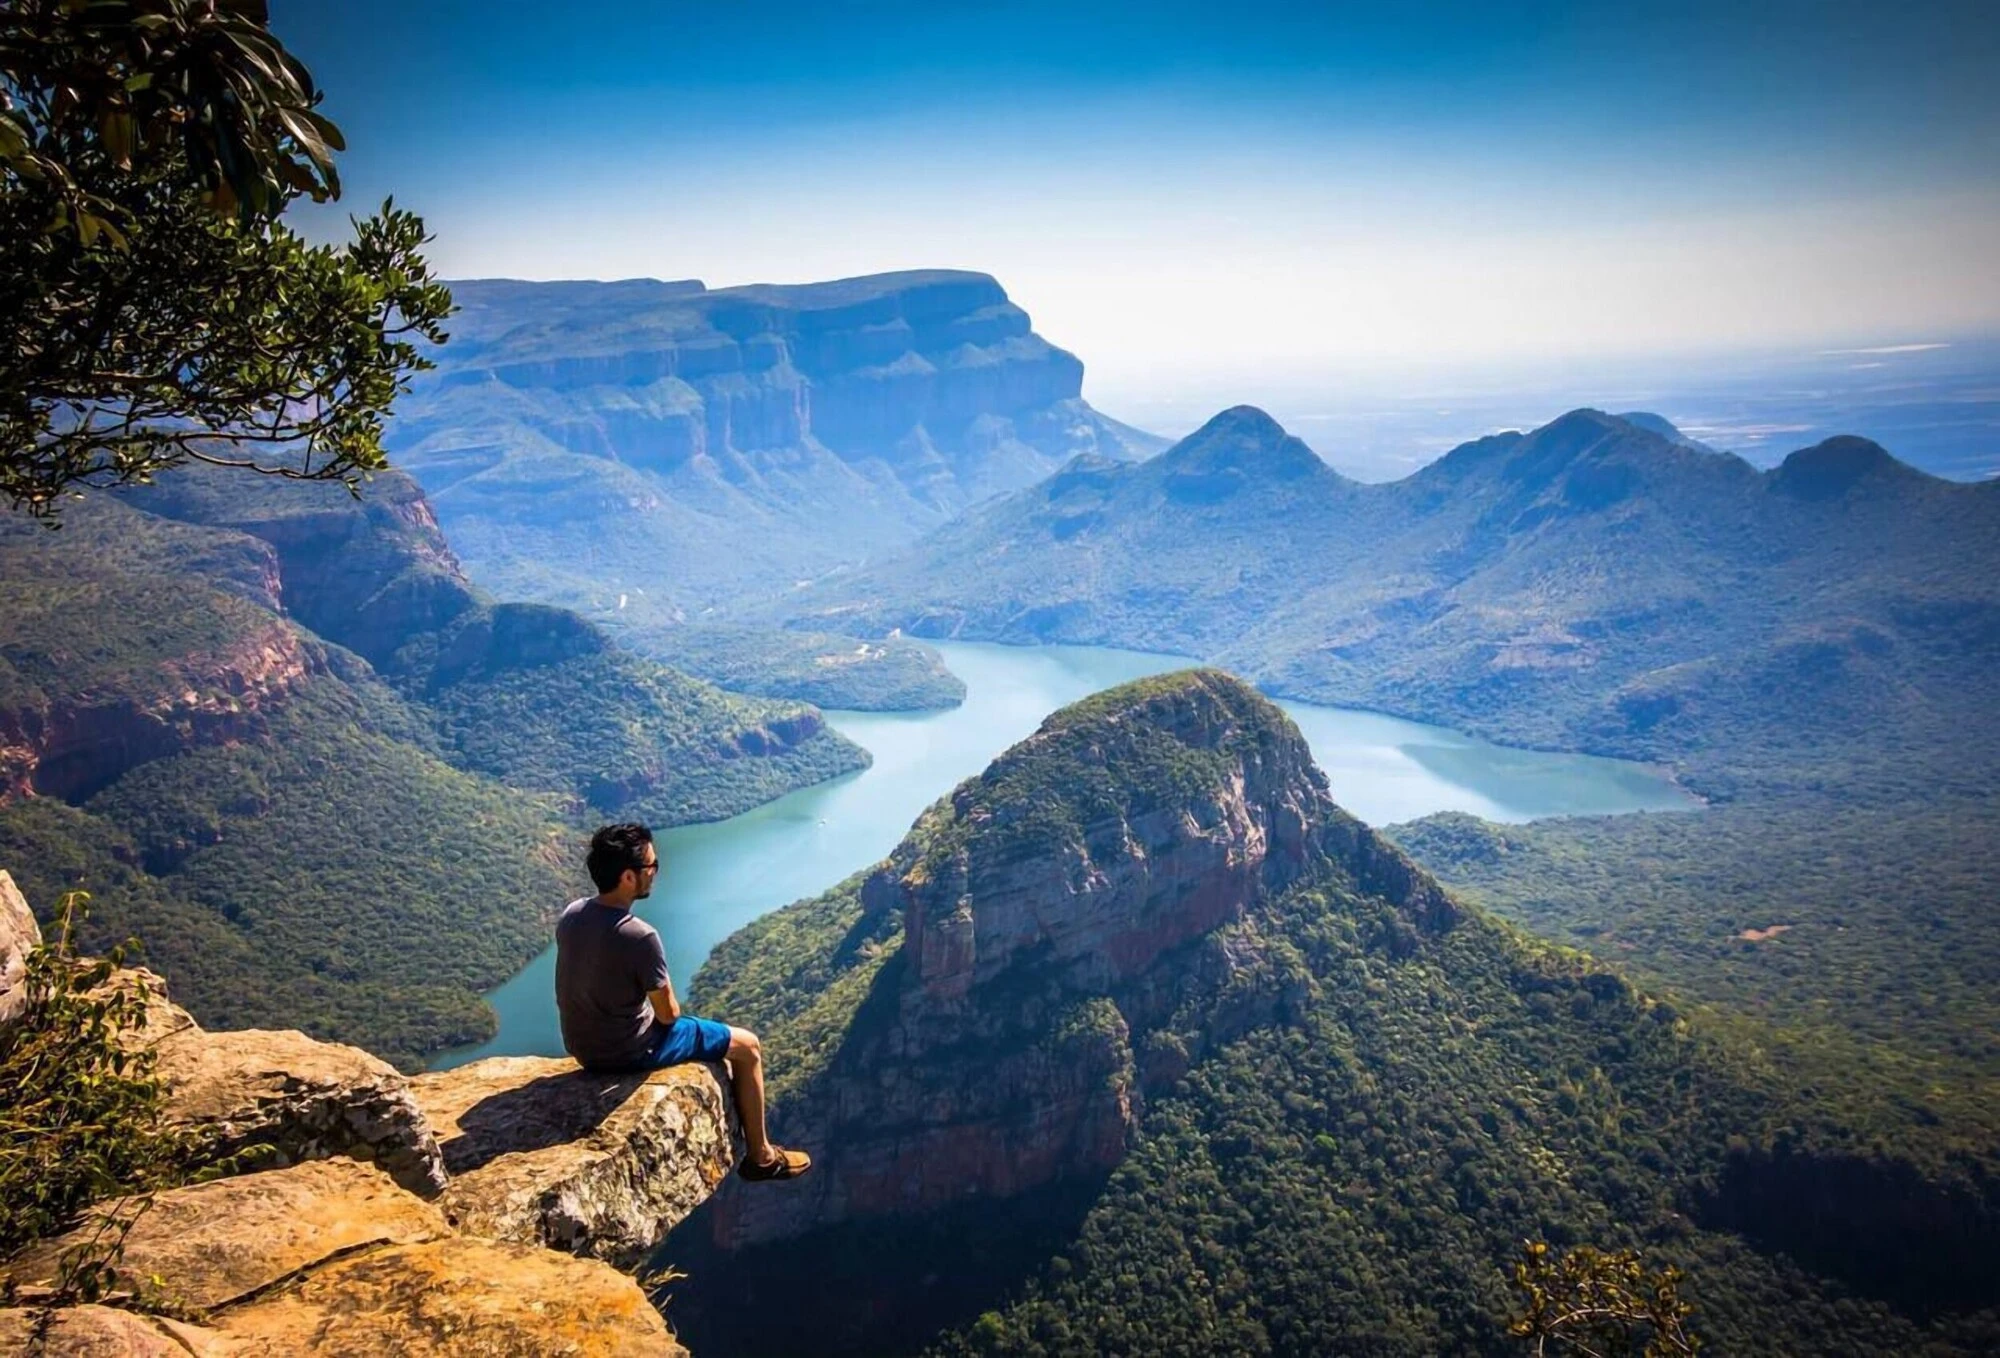 Visiting Blyde River Canyon, South Africa - One of the Best Photo Spots in South Africa